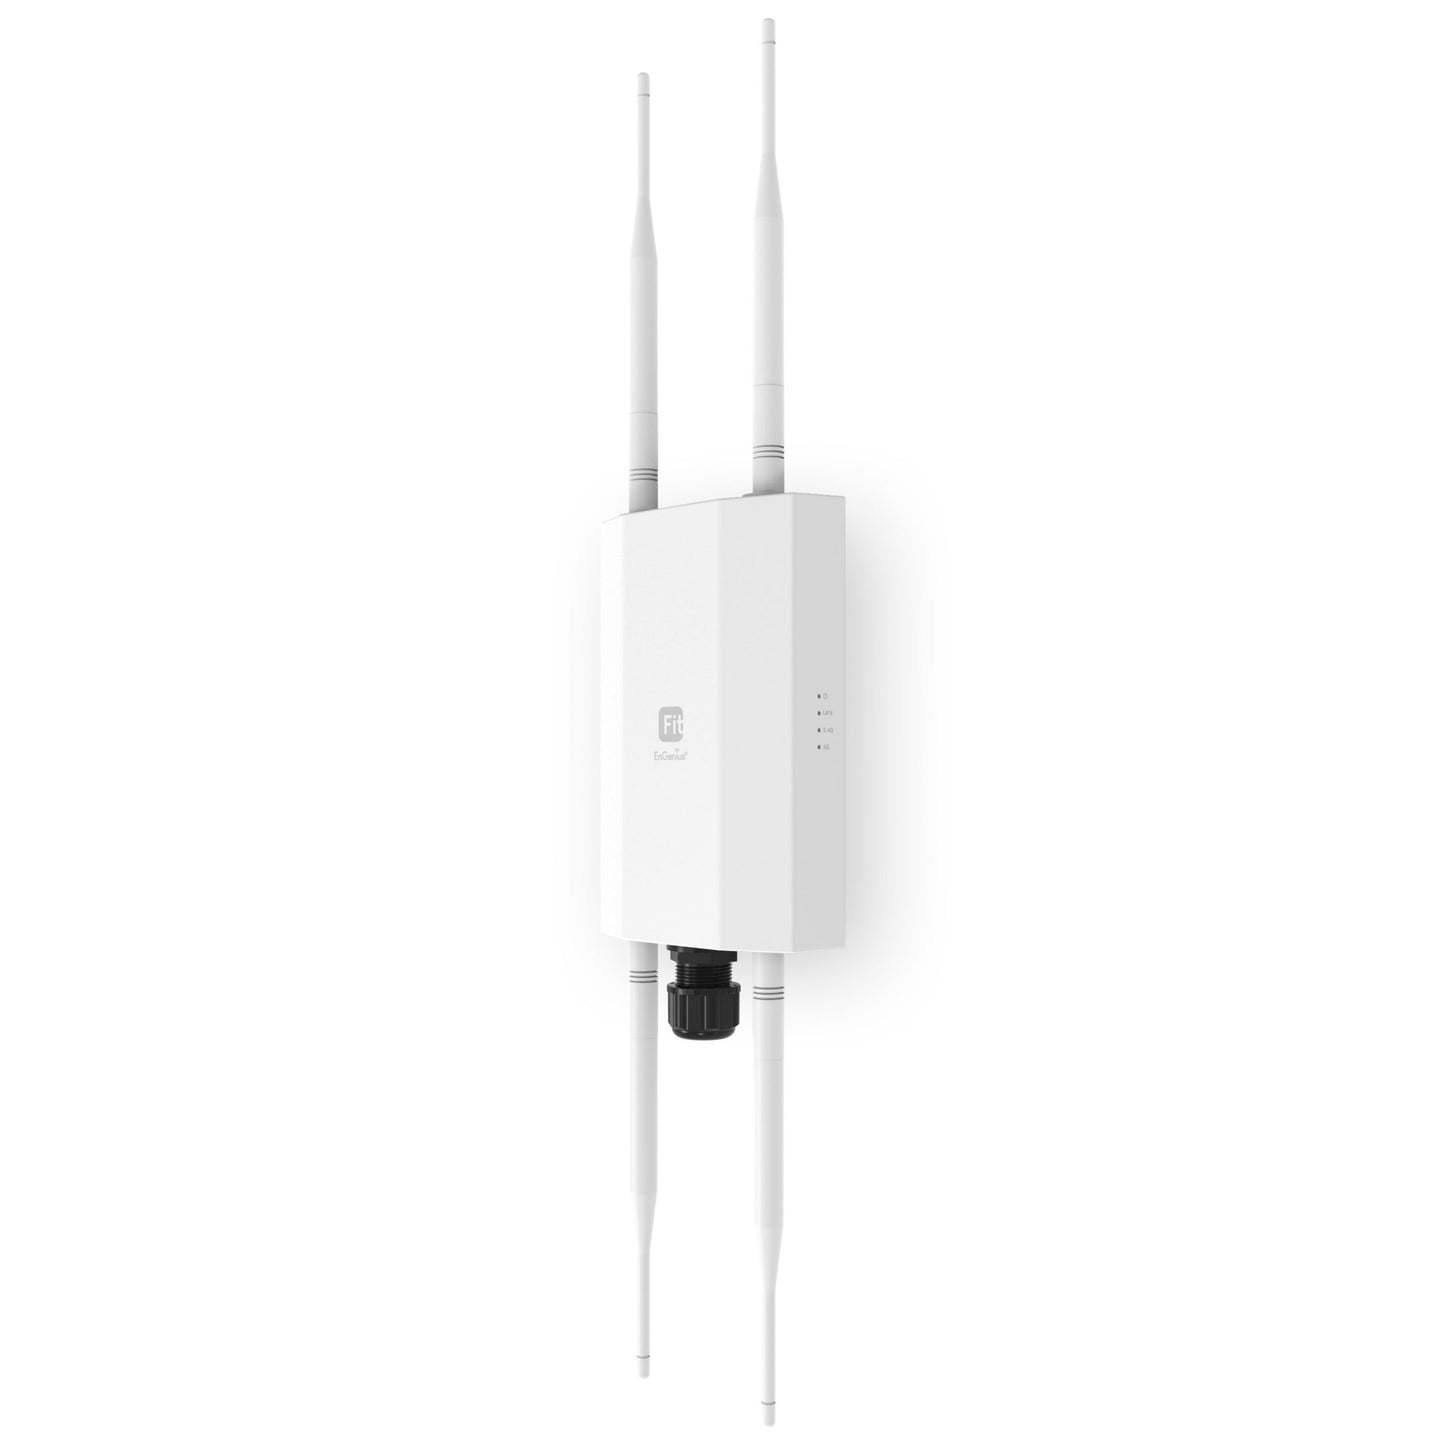 EnGenius (Fit) WiFi 6 Access Point (2x2 MU-MIMO) Outdoor - EWS850-FIT